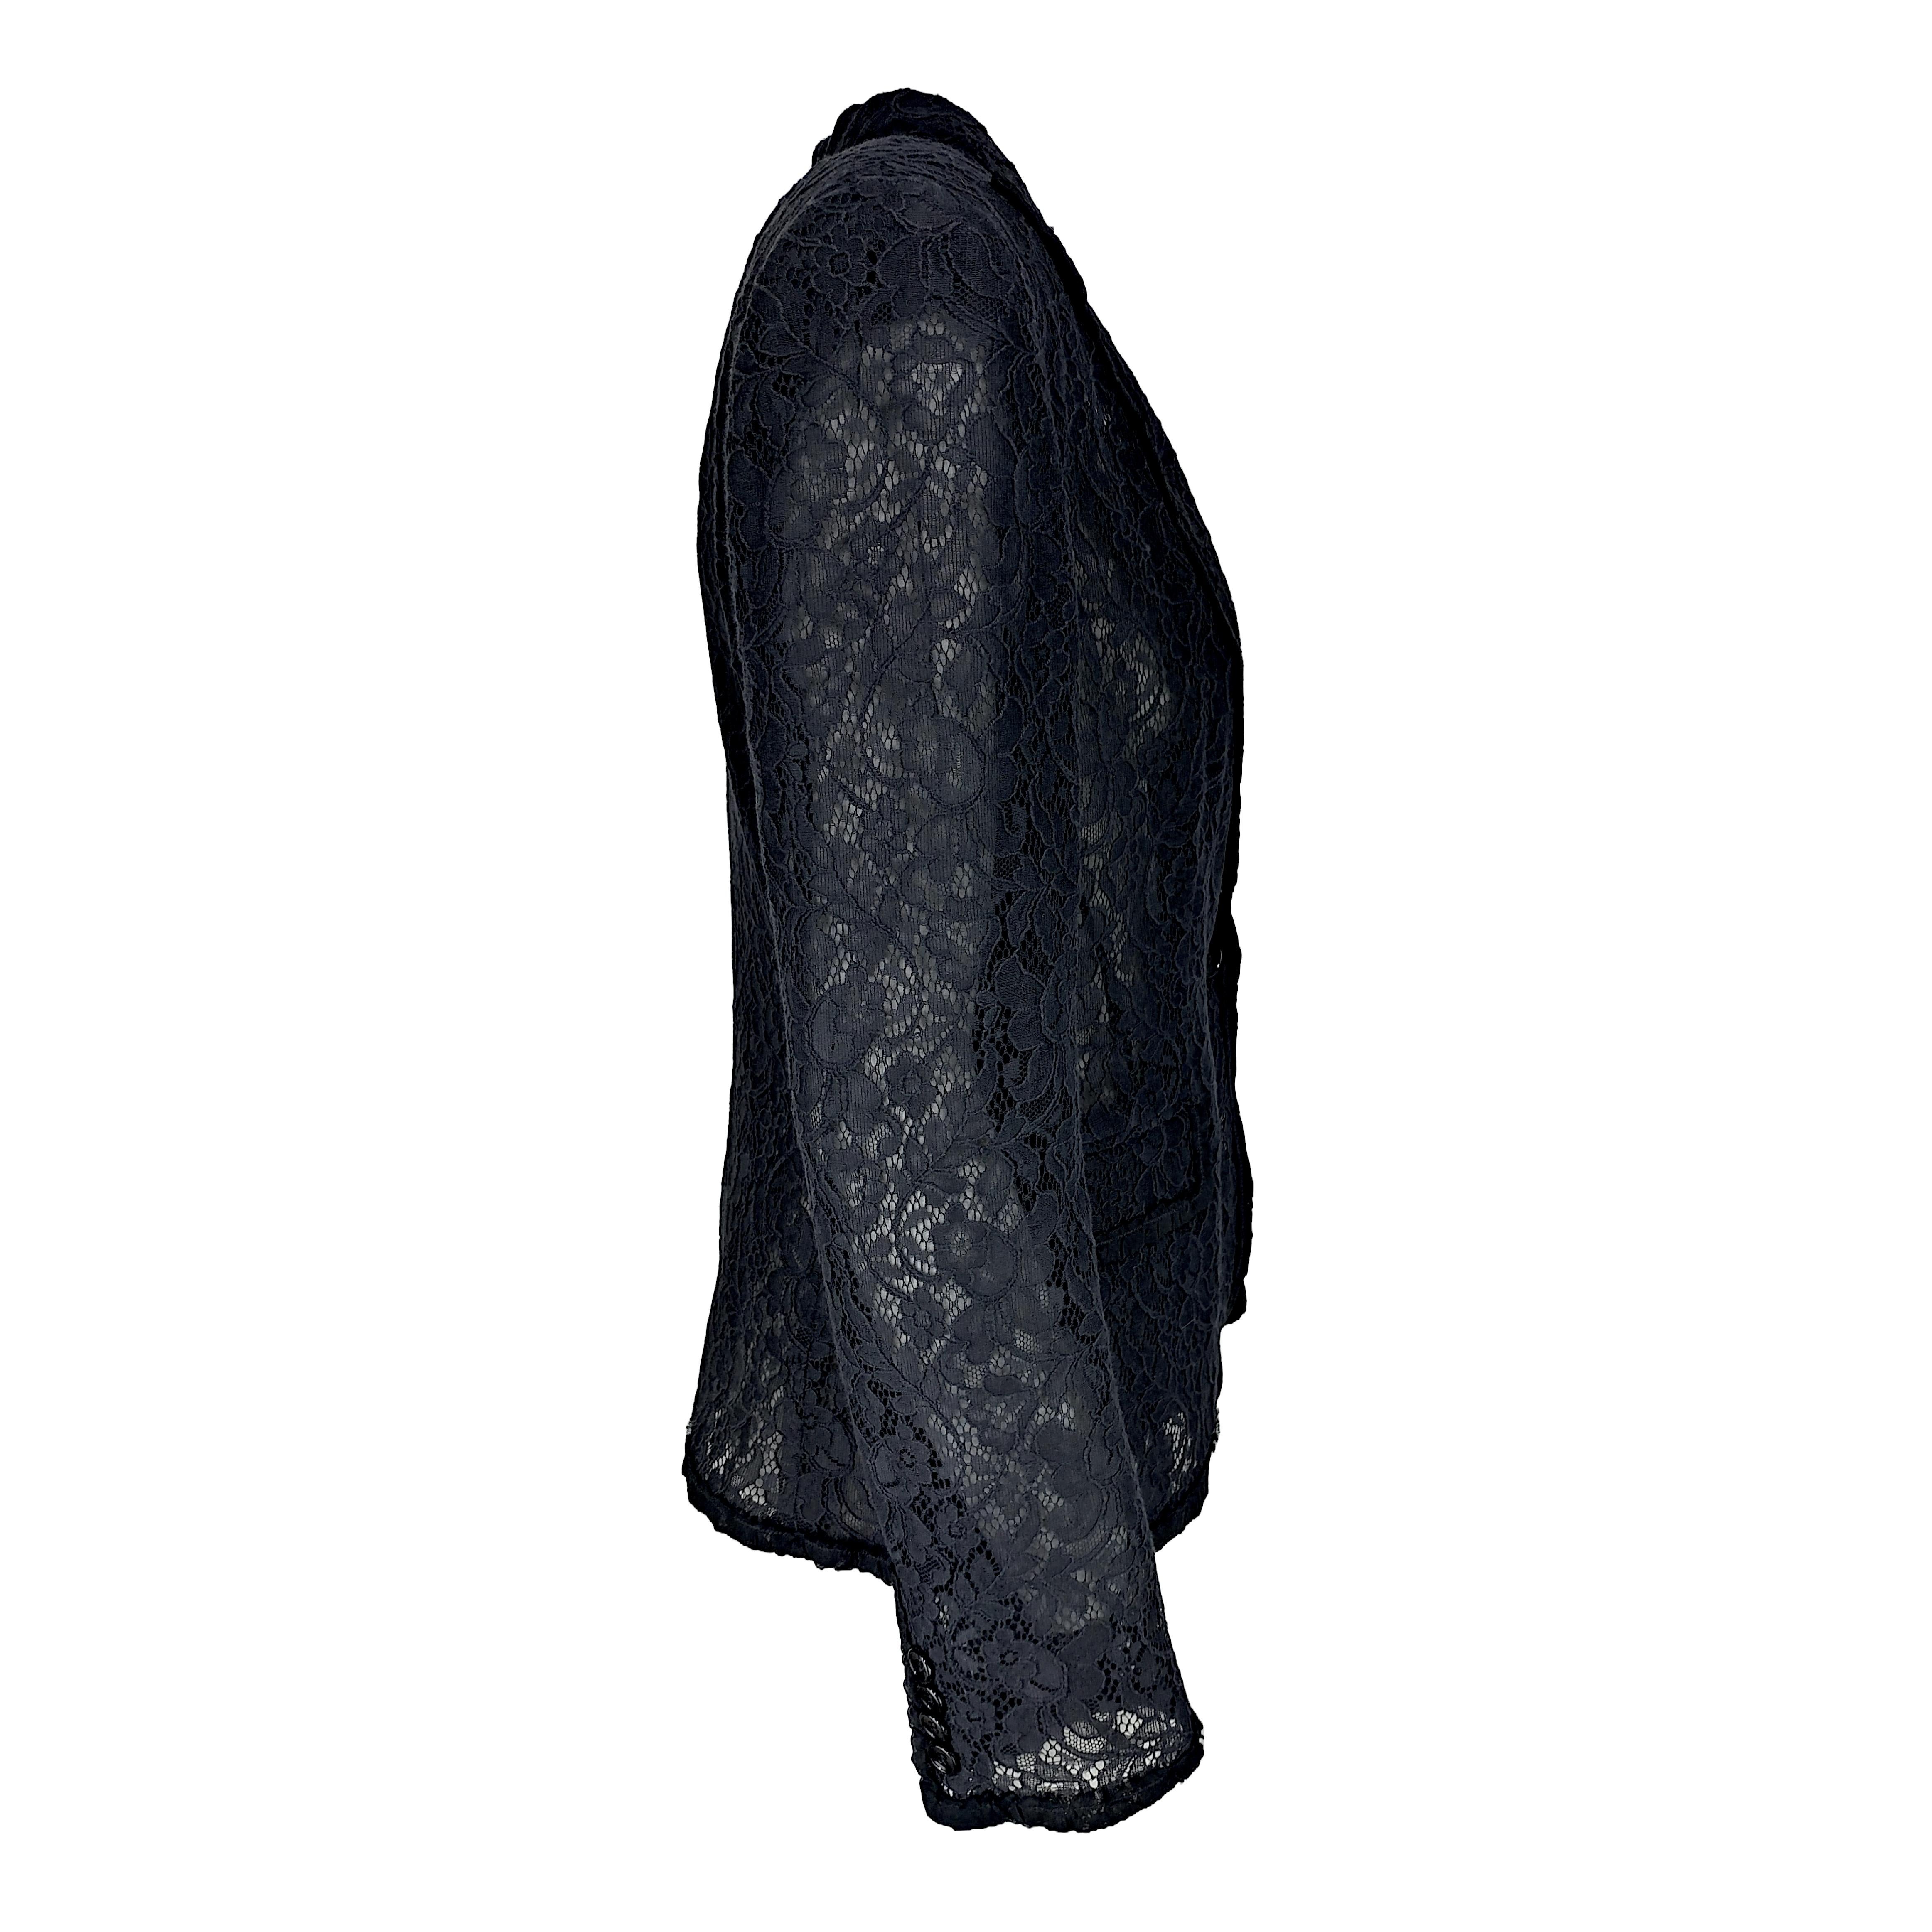 A very special item by the famous Italian design duo: an awesome lace blazer in black cotton, lined with a refined silk fabric. It features long sleeves, two front pockets and a single-button closure on the front. Perfect to wear over a t-shirt or